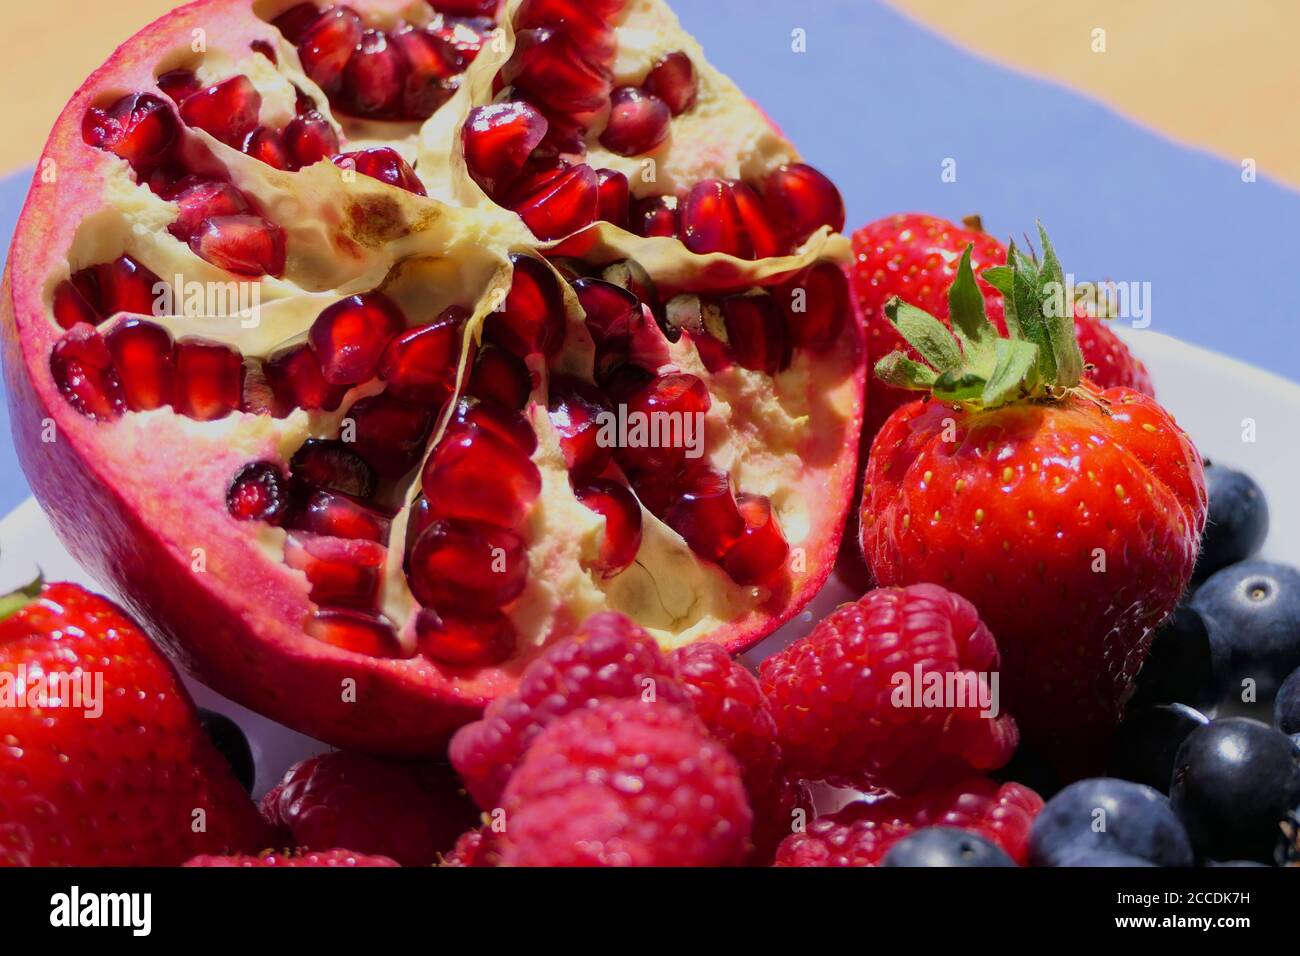 Macro shot of a fresh sliced sunlit pomegranate and mixed berries Stock Photo